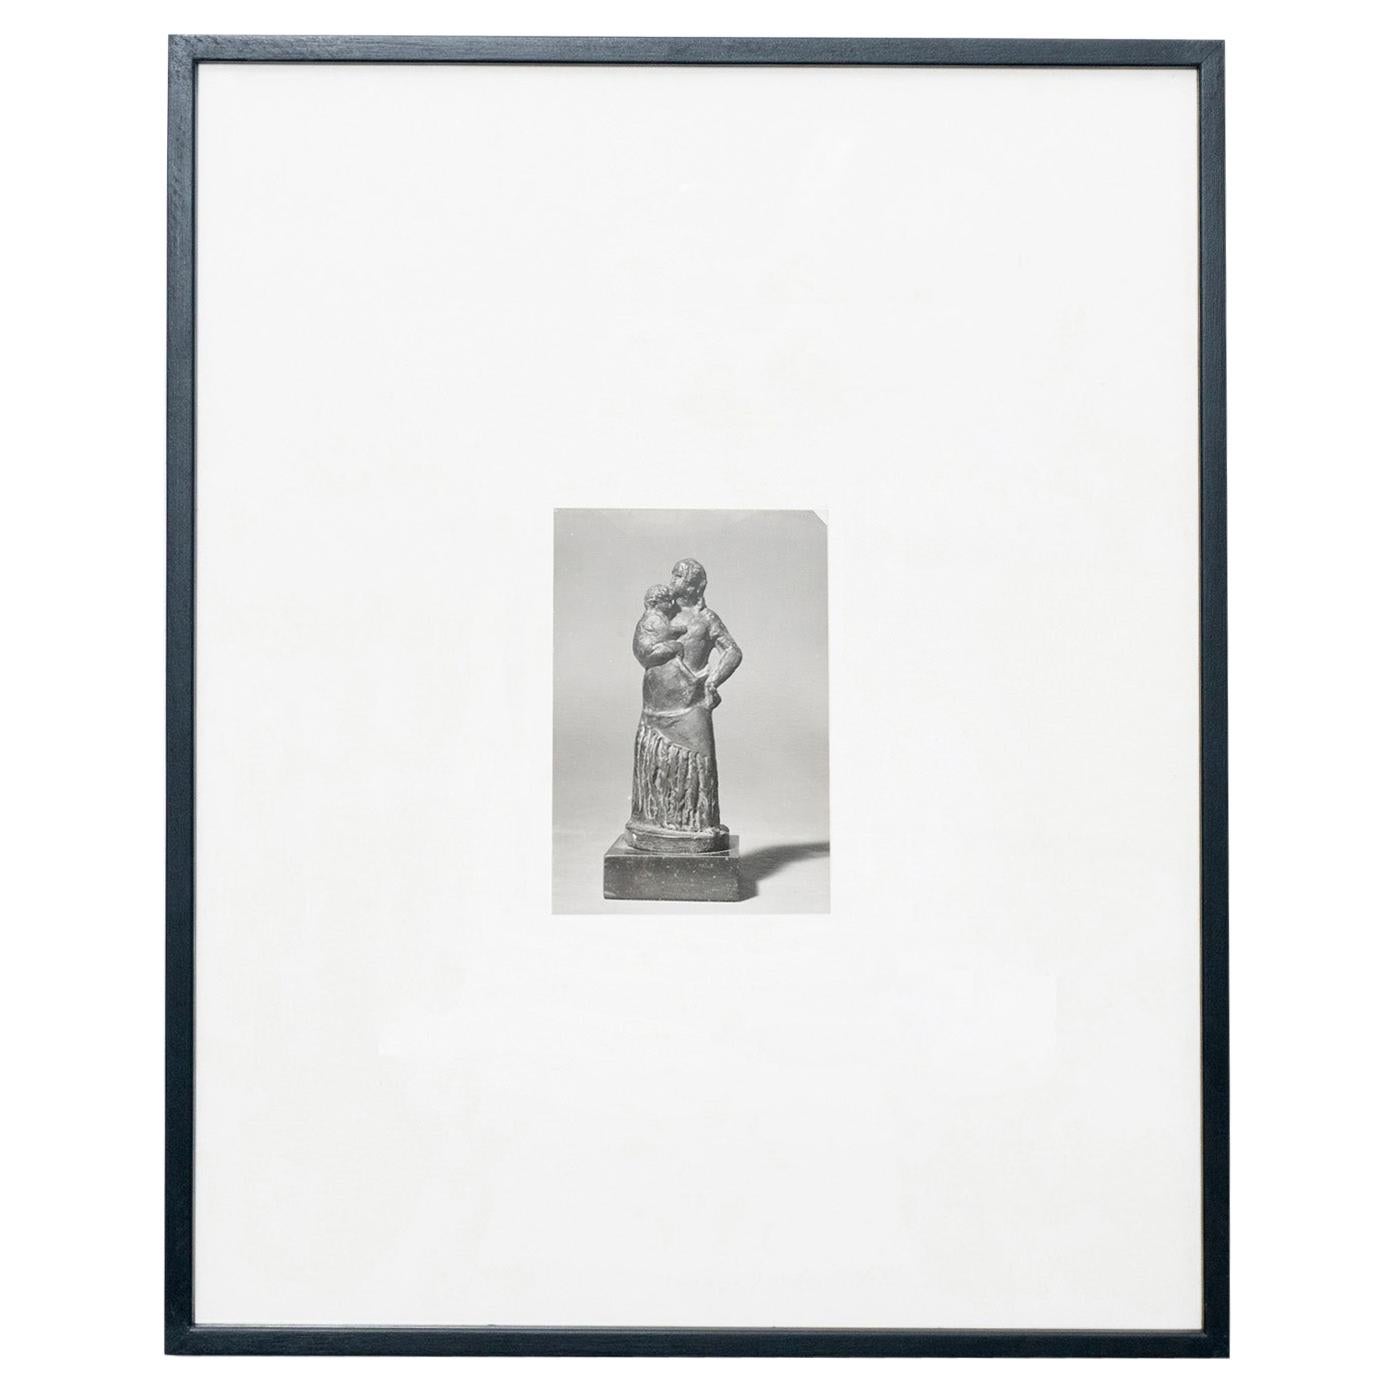 Manolo Hugue Mid Century Modern Archive Photography of Sculpture, circa 1960